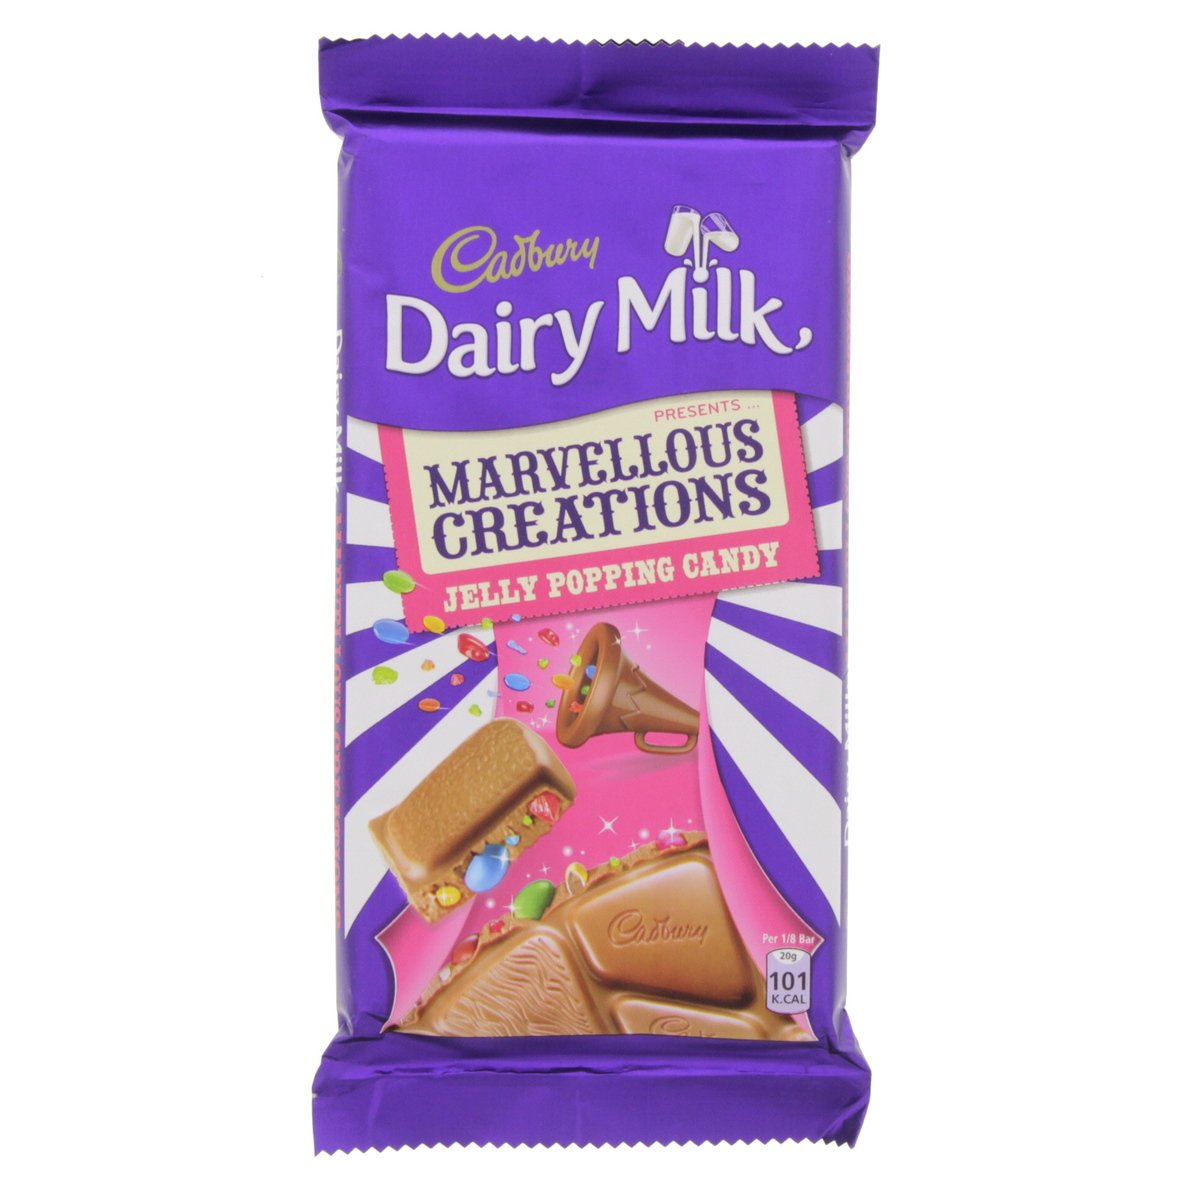 Cadbury Dairy Milk Marvelous Creations Jelly Popping Candy 160 g